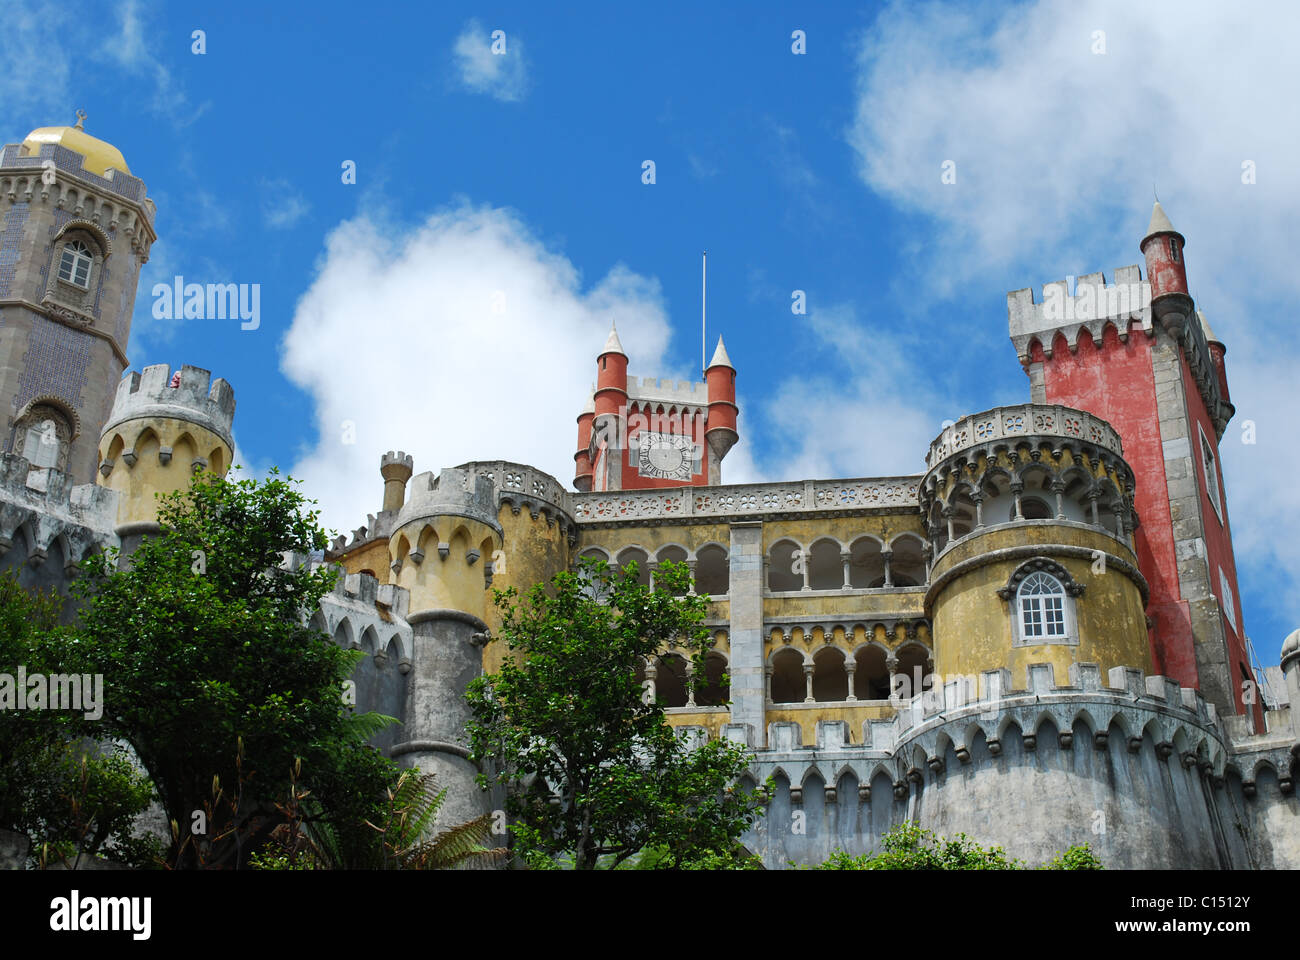 National Palace of Pena in Sintra, Portugal Stock Photo